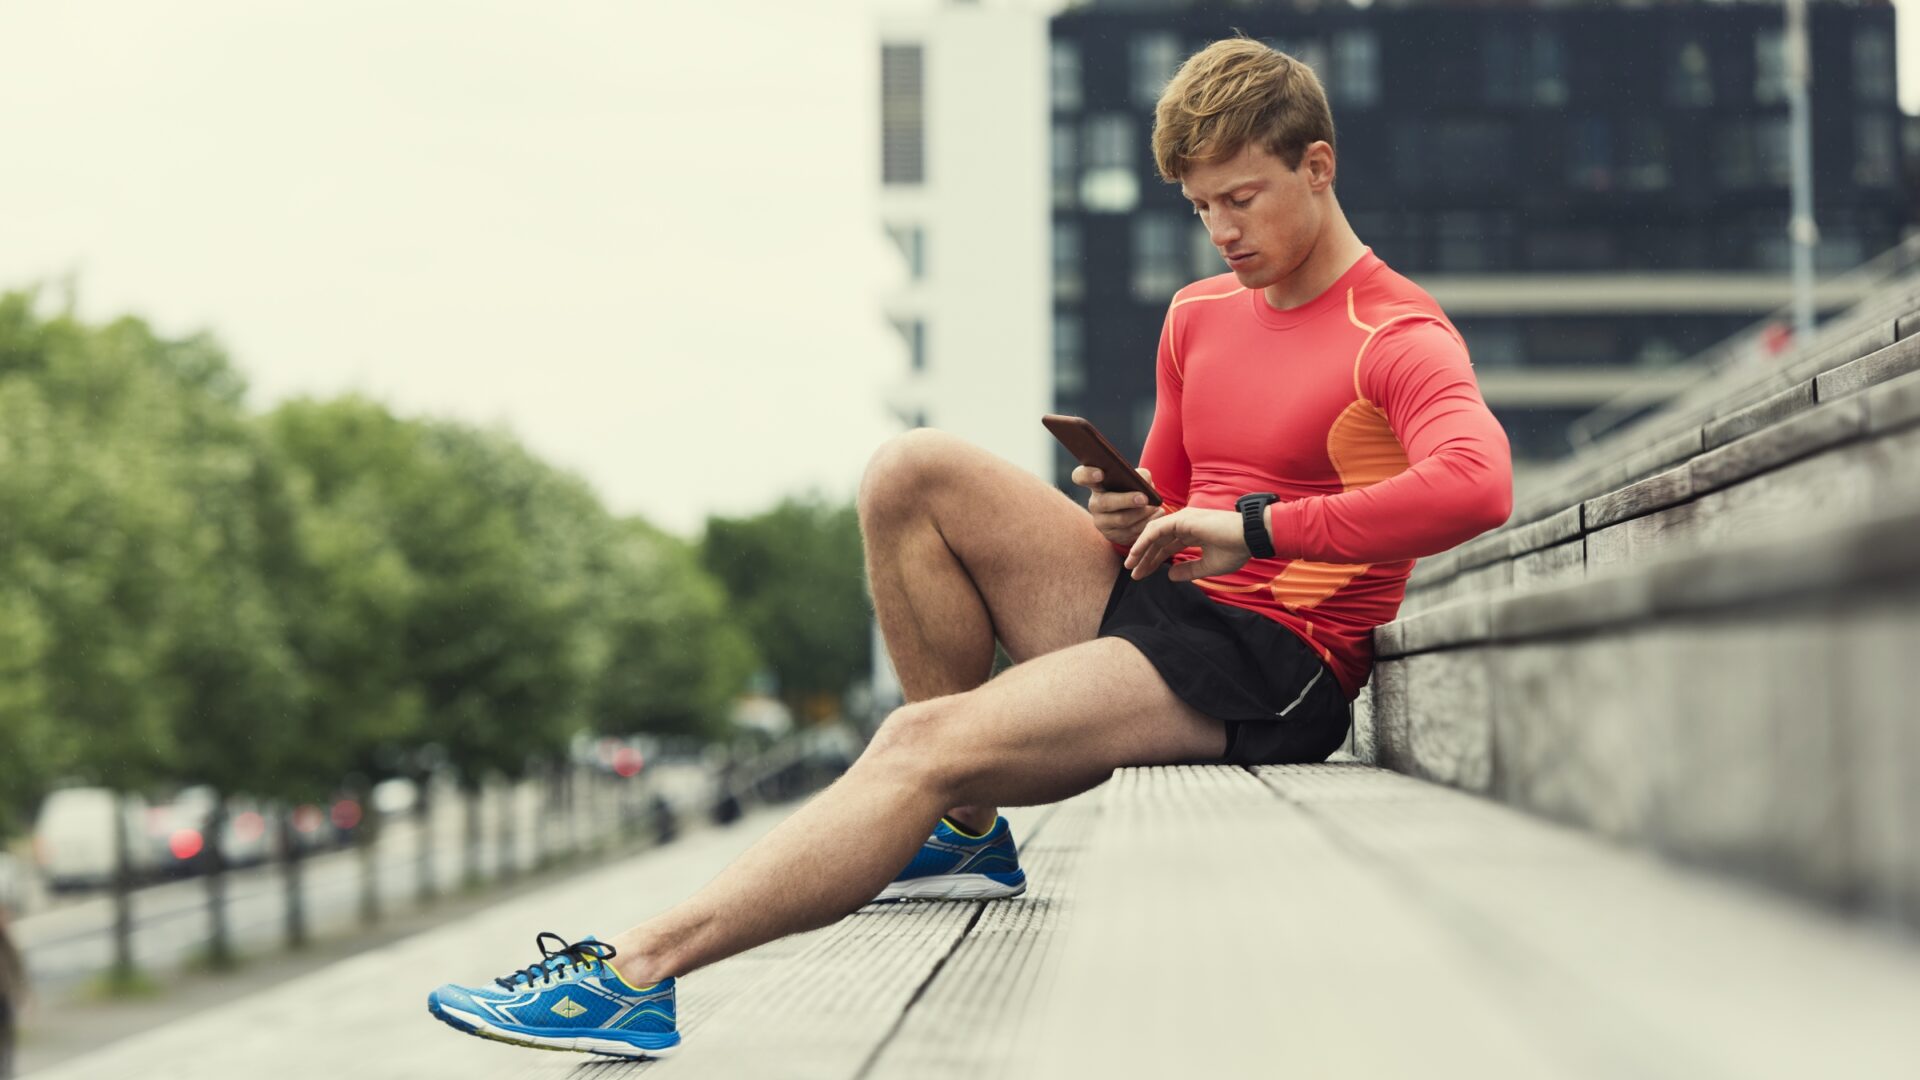 A runner rests on concrete steps while checking data on their watch and phone.